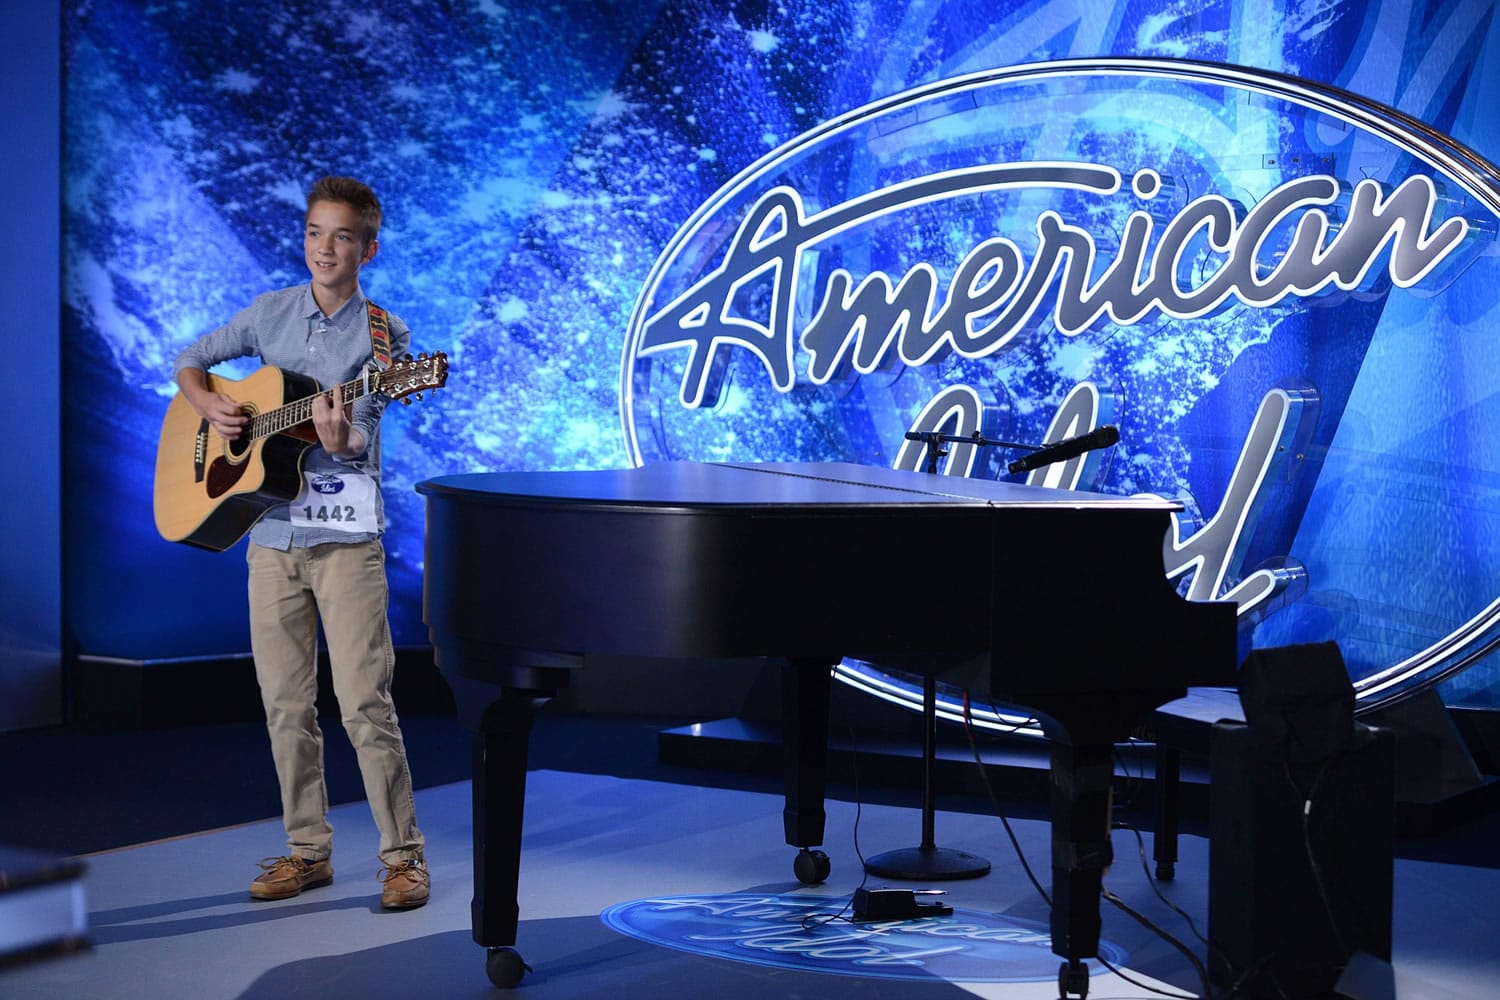 American Idol
Union High School student Daniel Seavey, 15, auditions in San Francisco for the 14th season of &quot;American Idol.&quot;